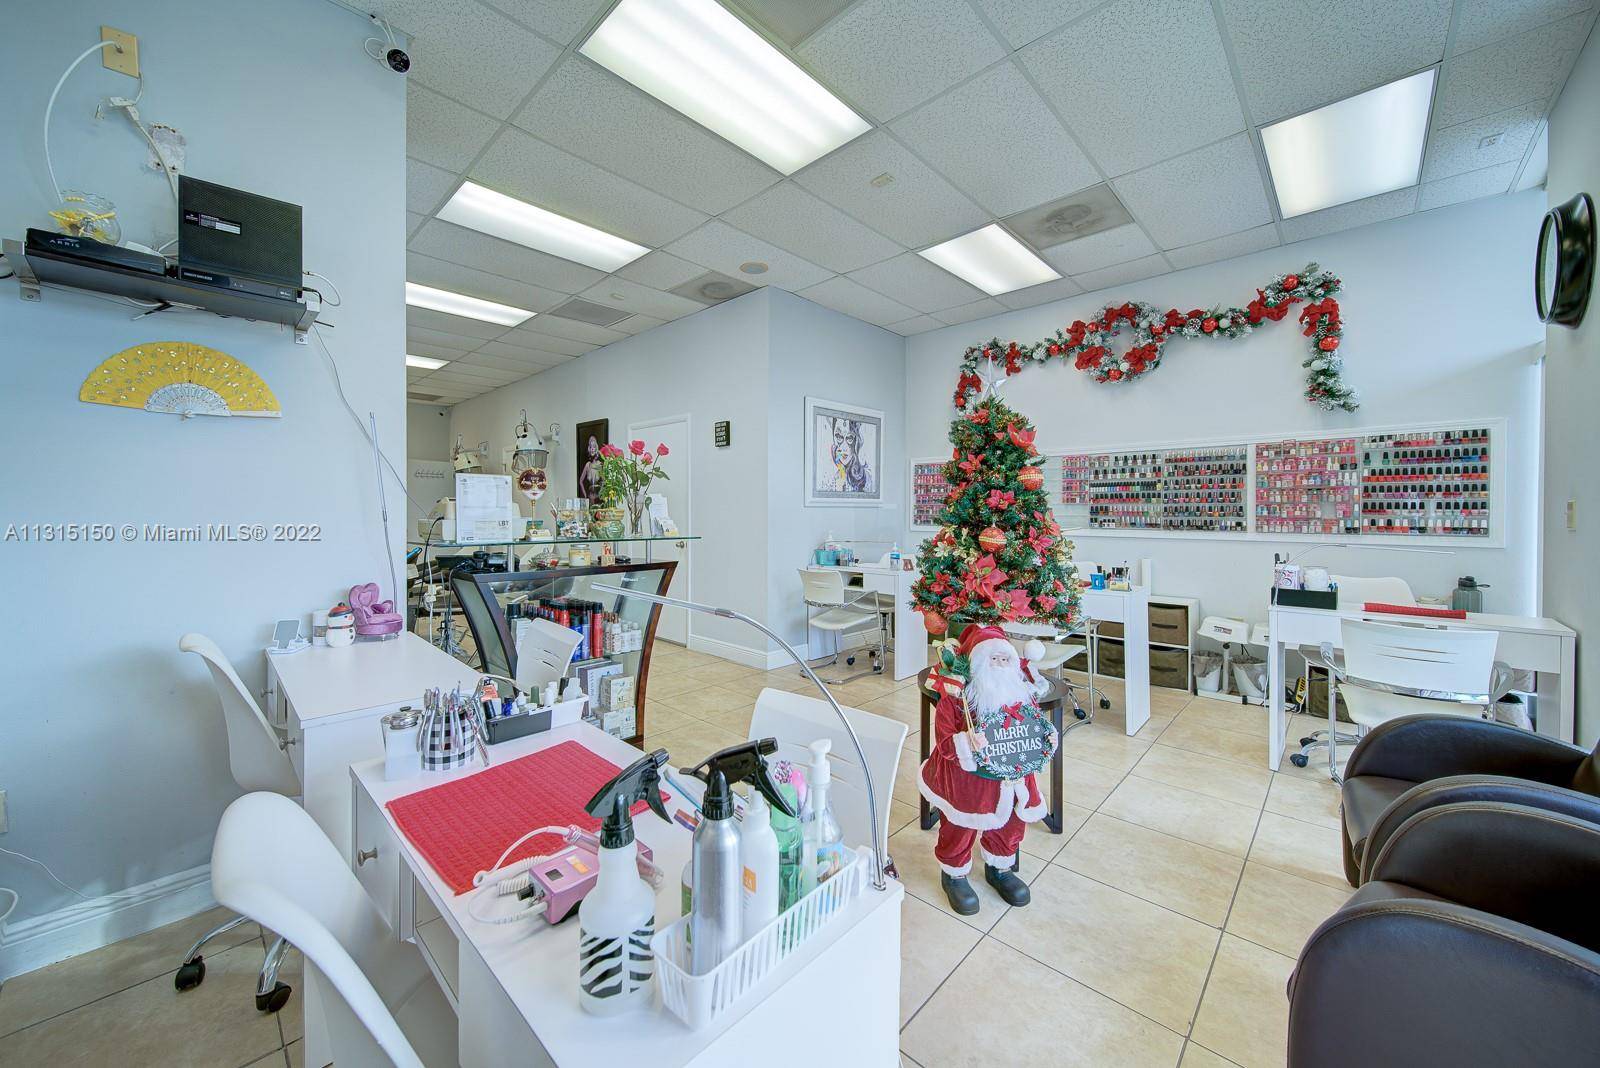 Beauty salon for sale on Bird Road in Kendall.